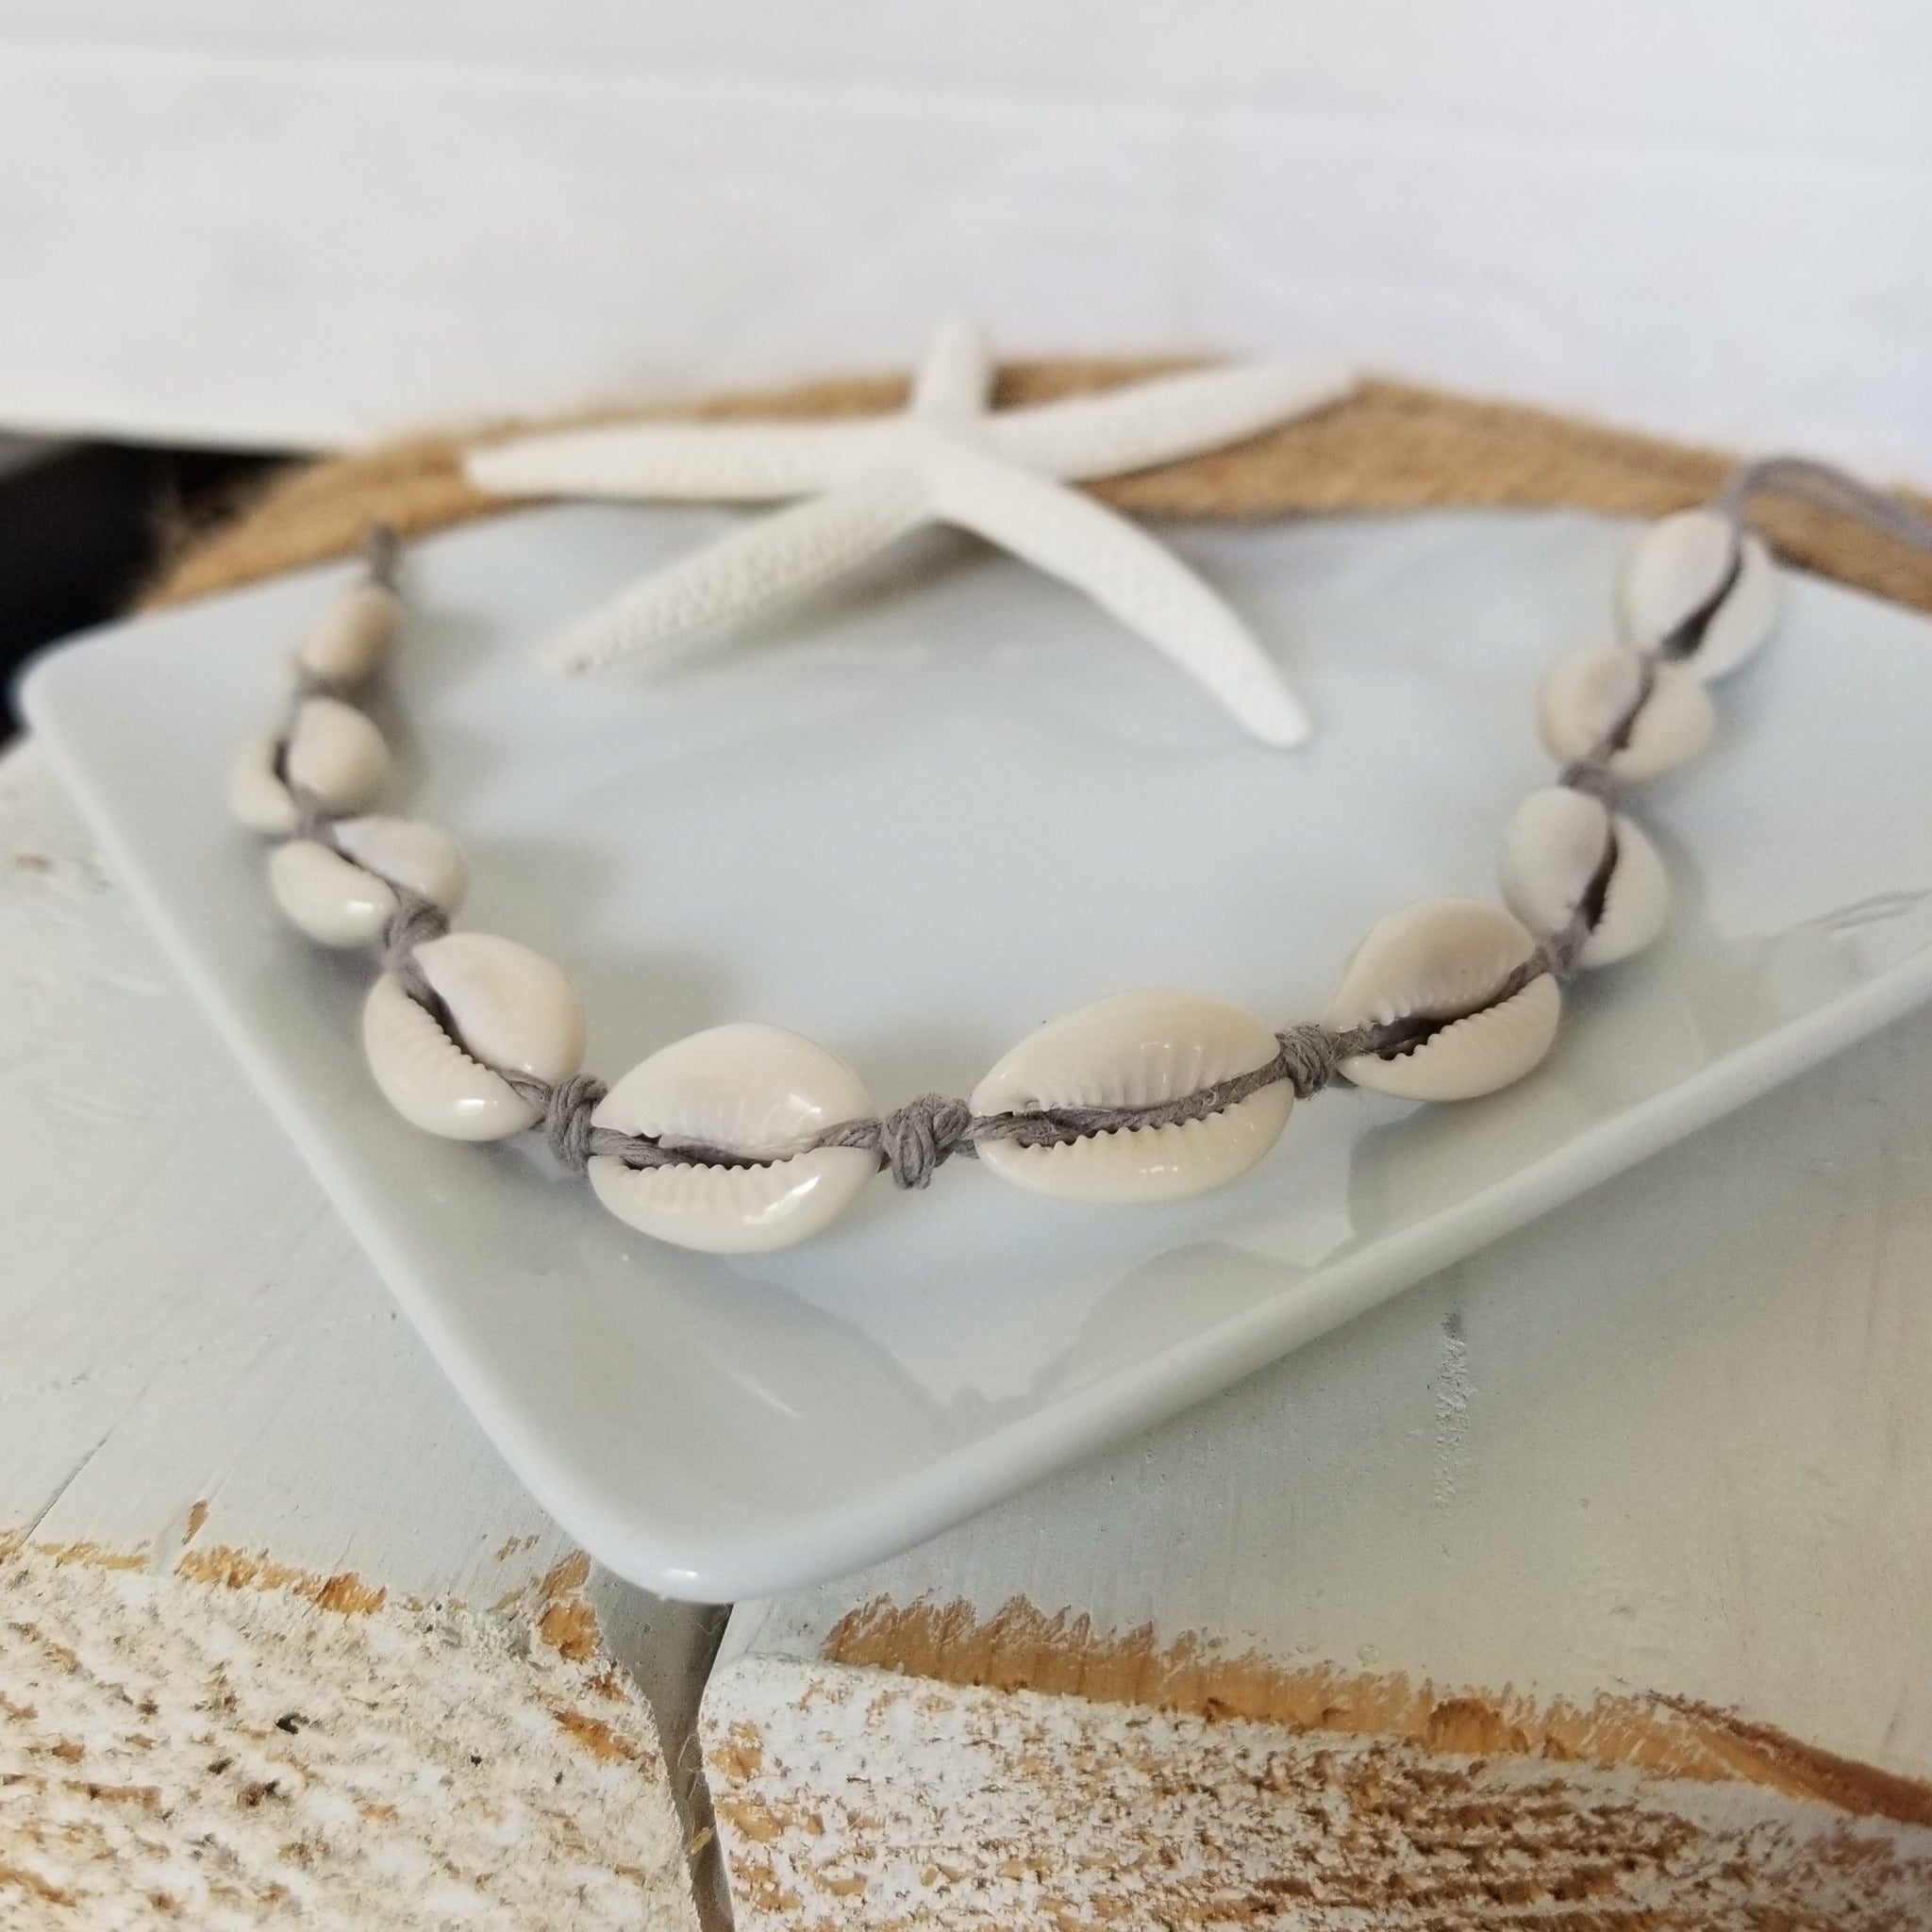 Puka Shell Jewelry - Necklace - Bracelet or Anklet